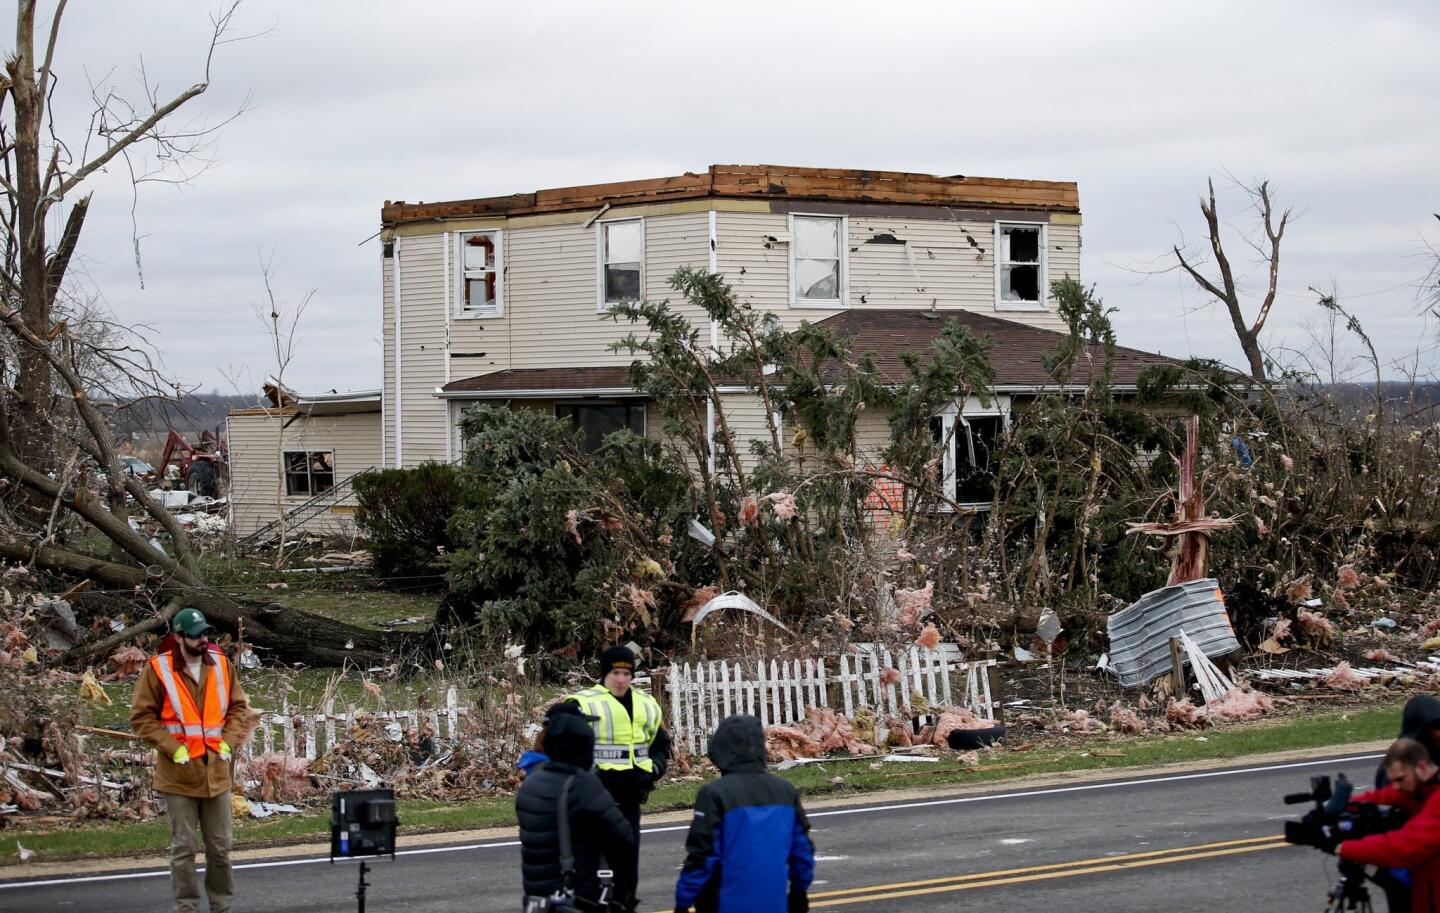 Locals inspect a home left in ruins in a destroyed neighborhood after a heavy storm in Fairland, Ill.